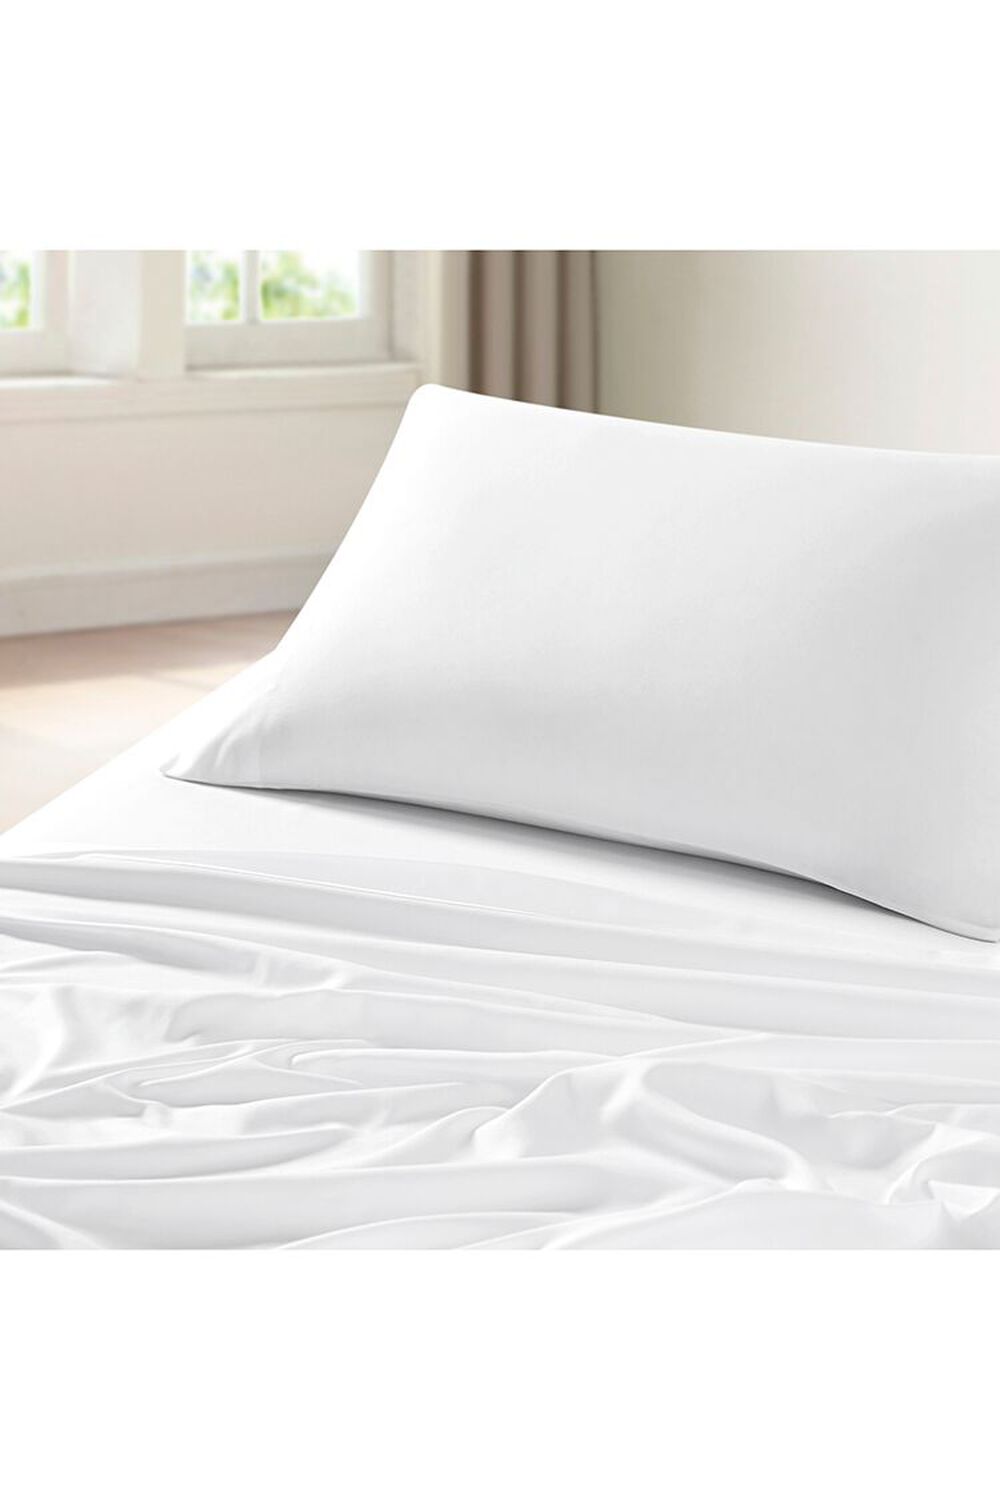 WHITE Queen-Sized Sheet Set, image 1